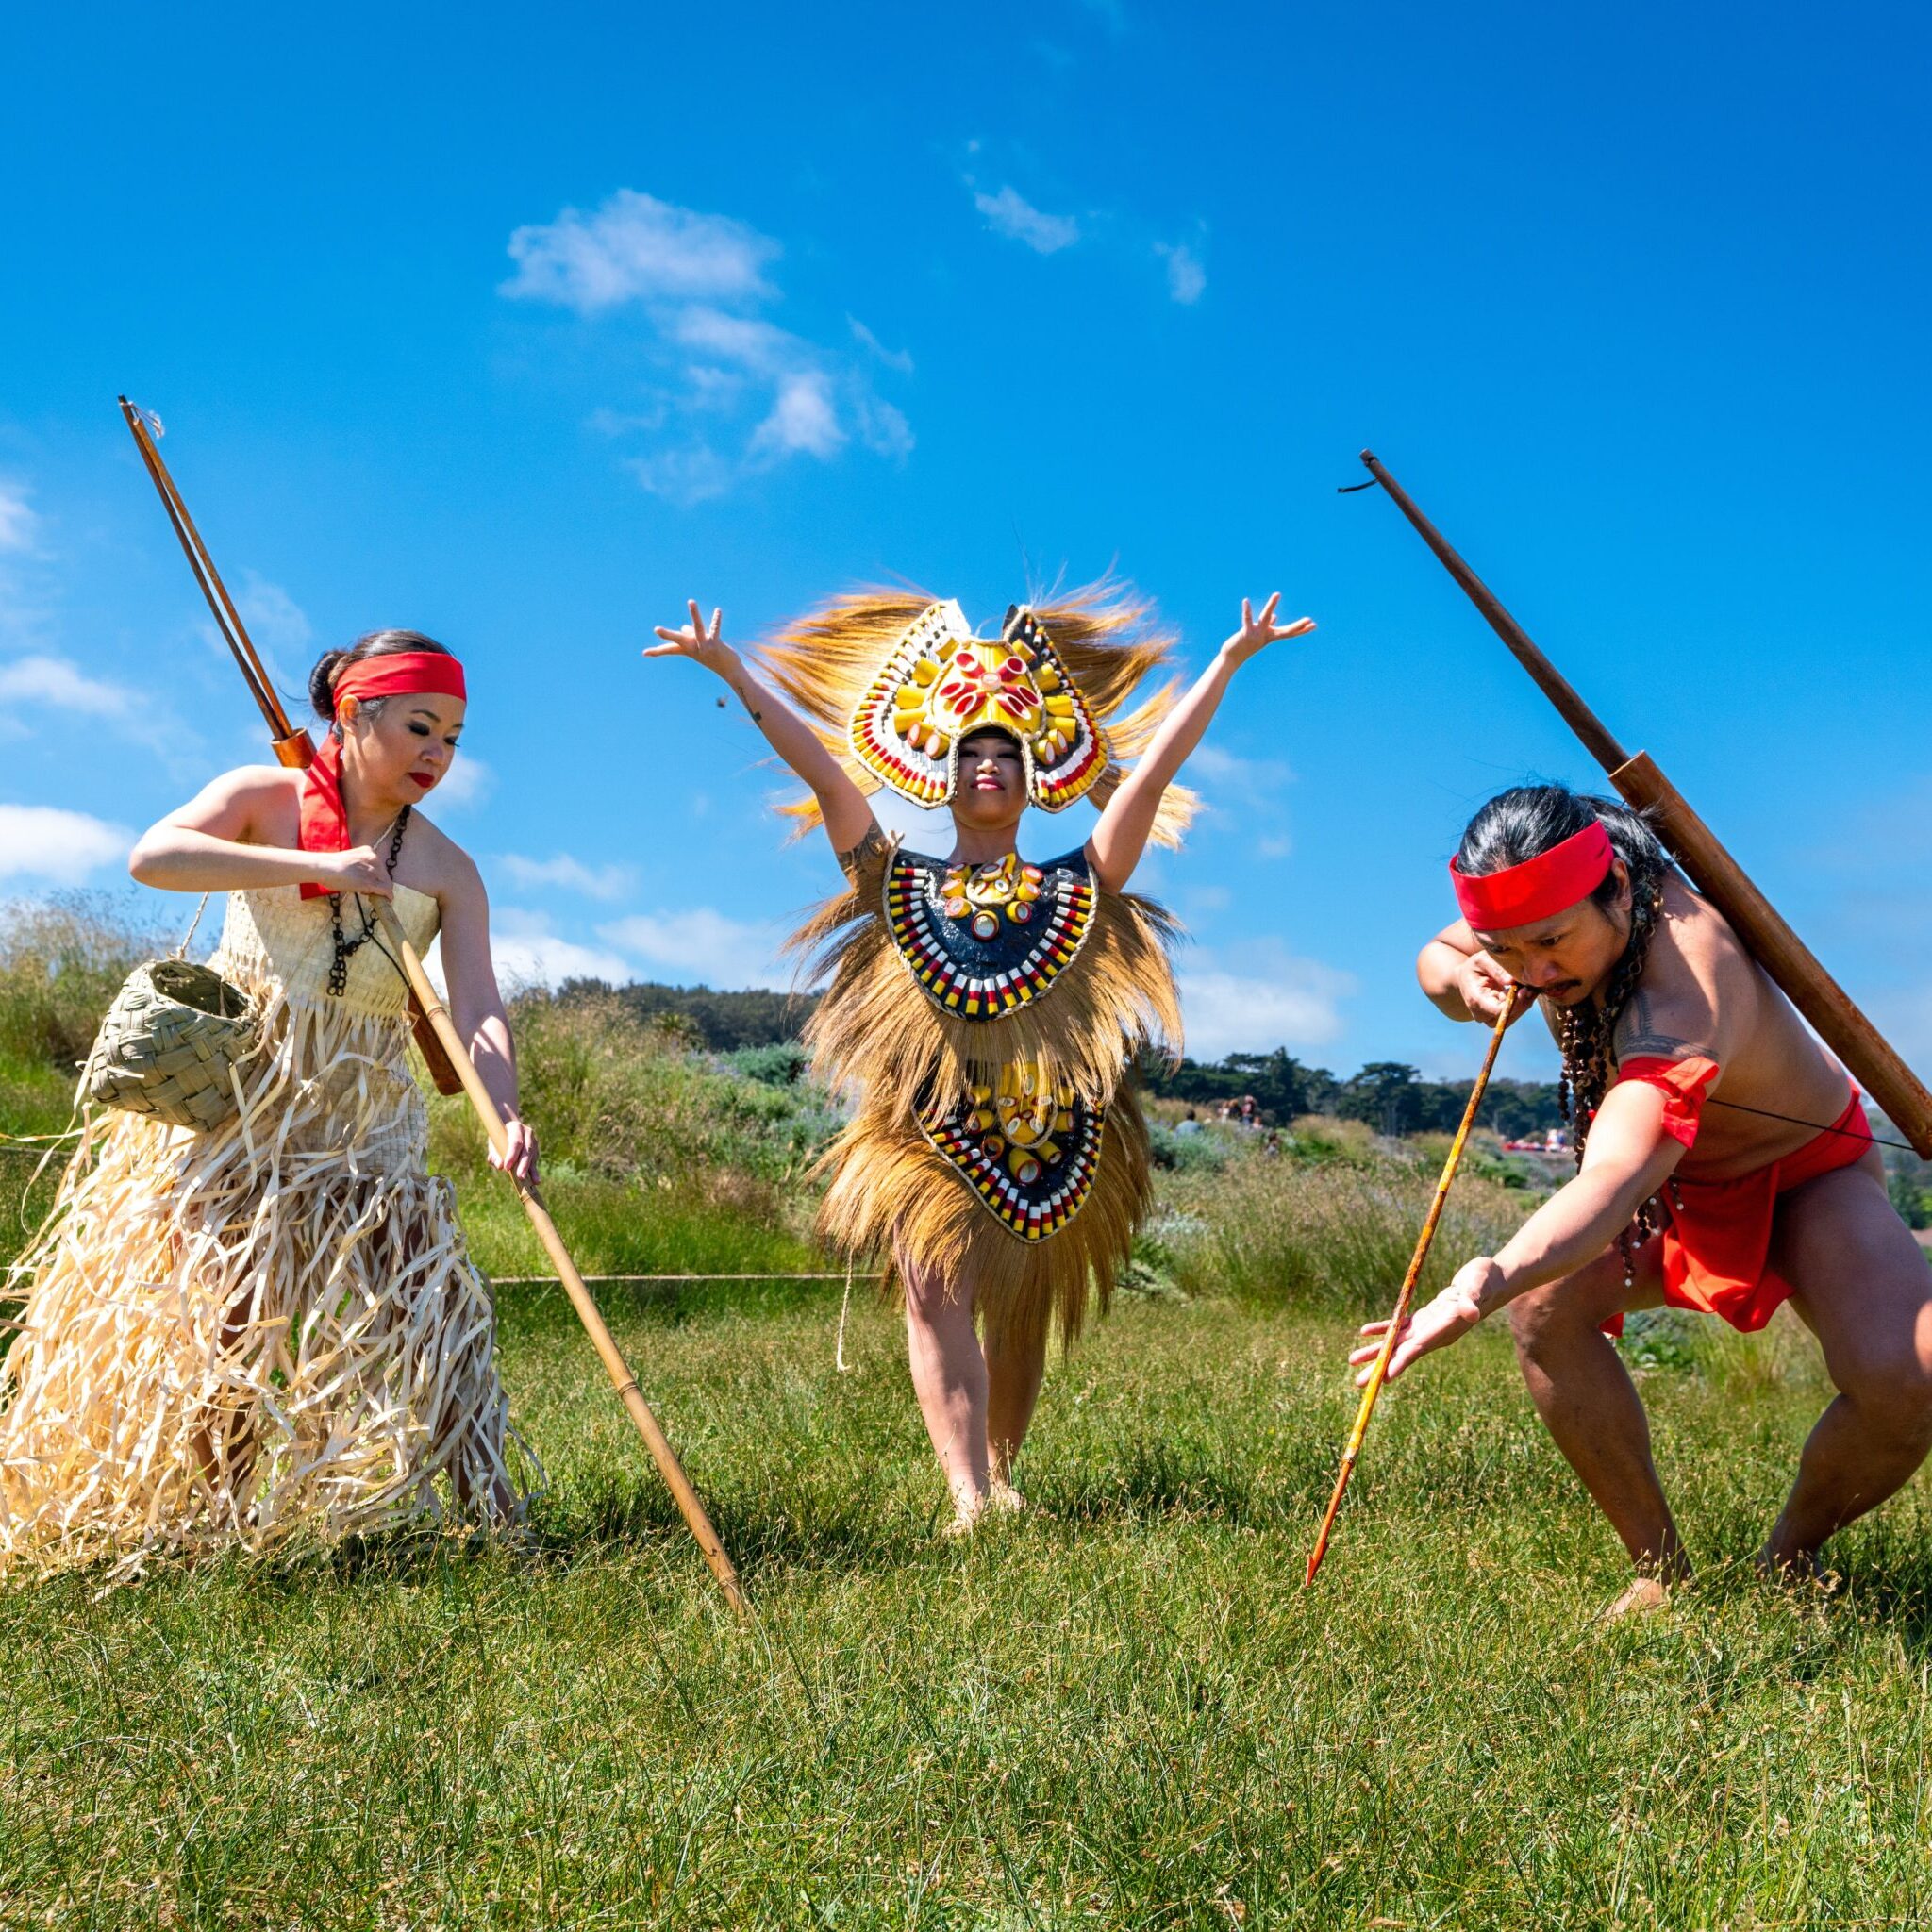 Three Filipino dancers in cultural attire and headdress. 2 women in tan grass-colored dresses, one carries a basket and large stick, the other is in a two piece ensemble with a large headdress made of grass and yellow/blue/red materials. The male dancer is wearing a red headband and loincloth while posing with a traditional bow and arrow. 